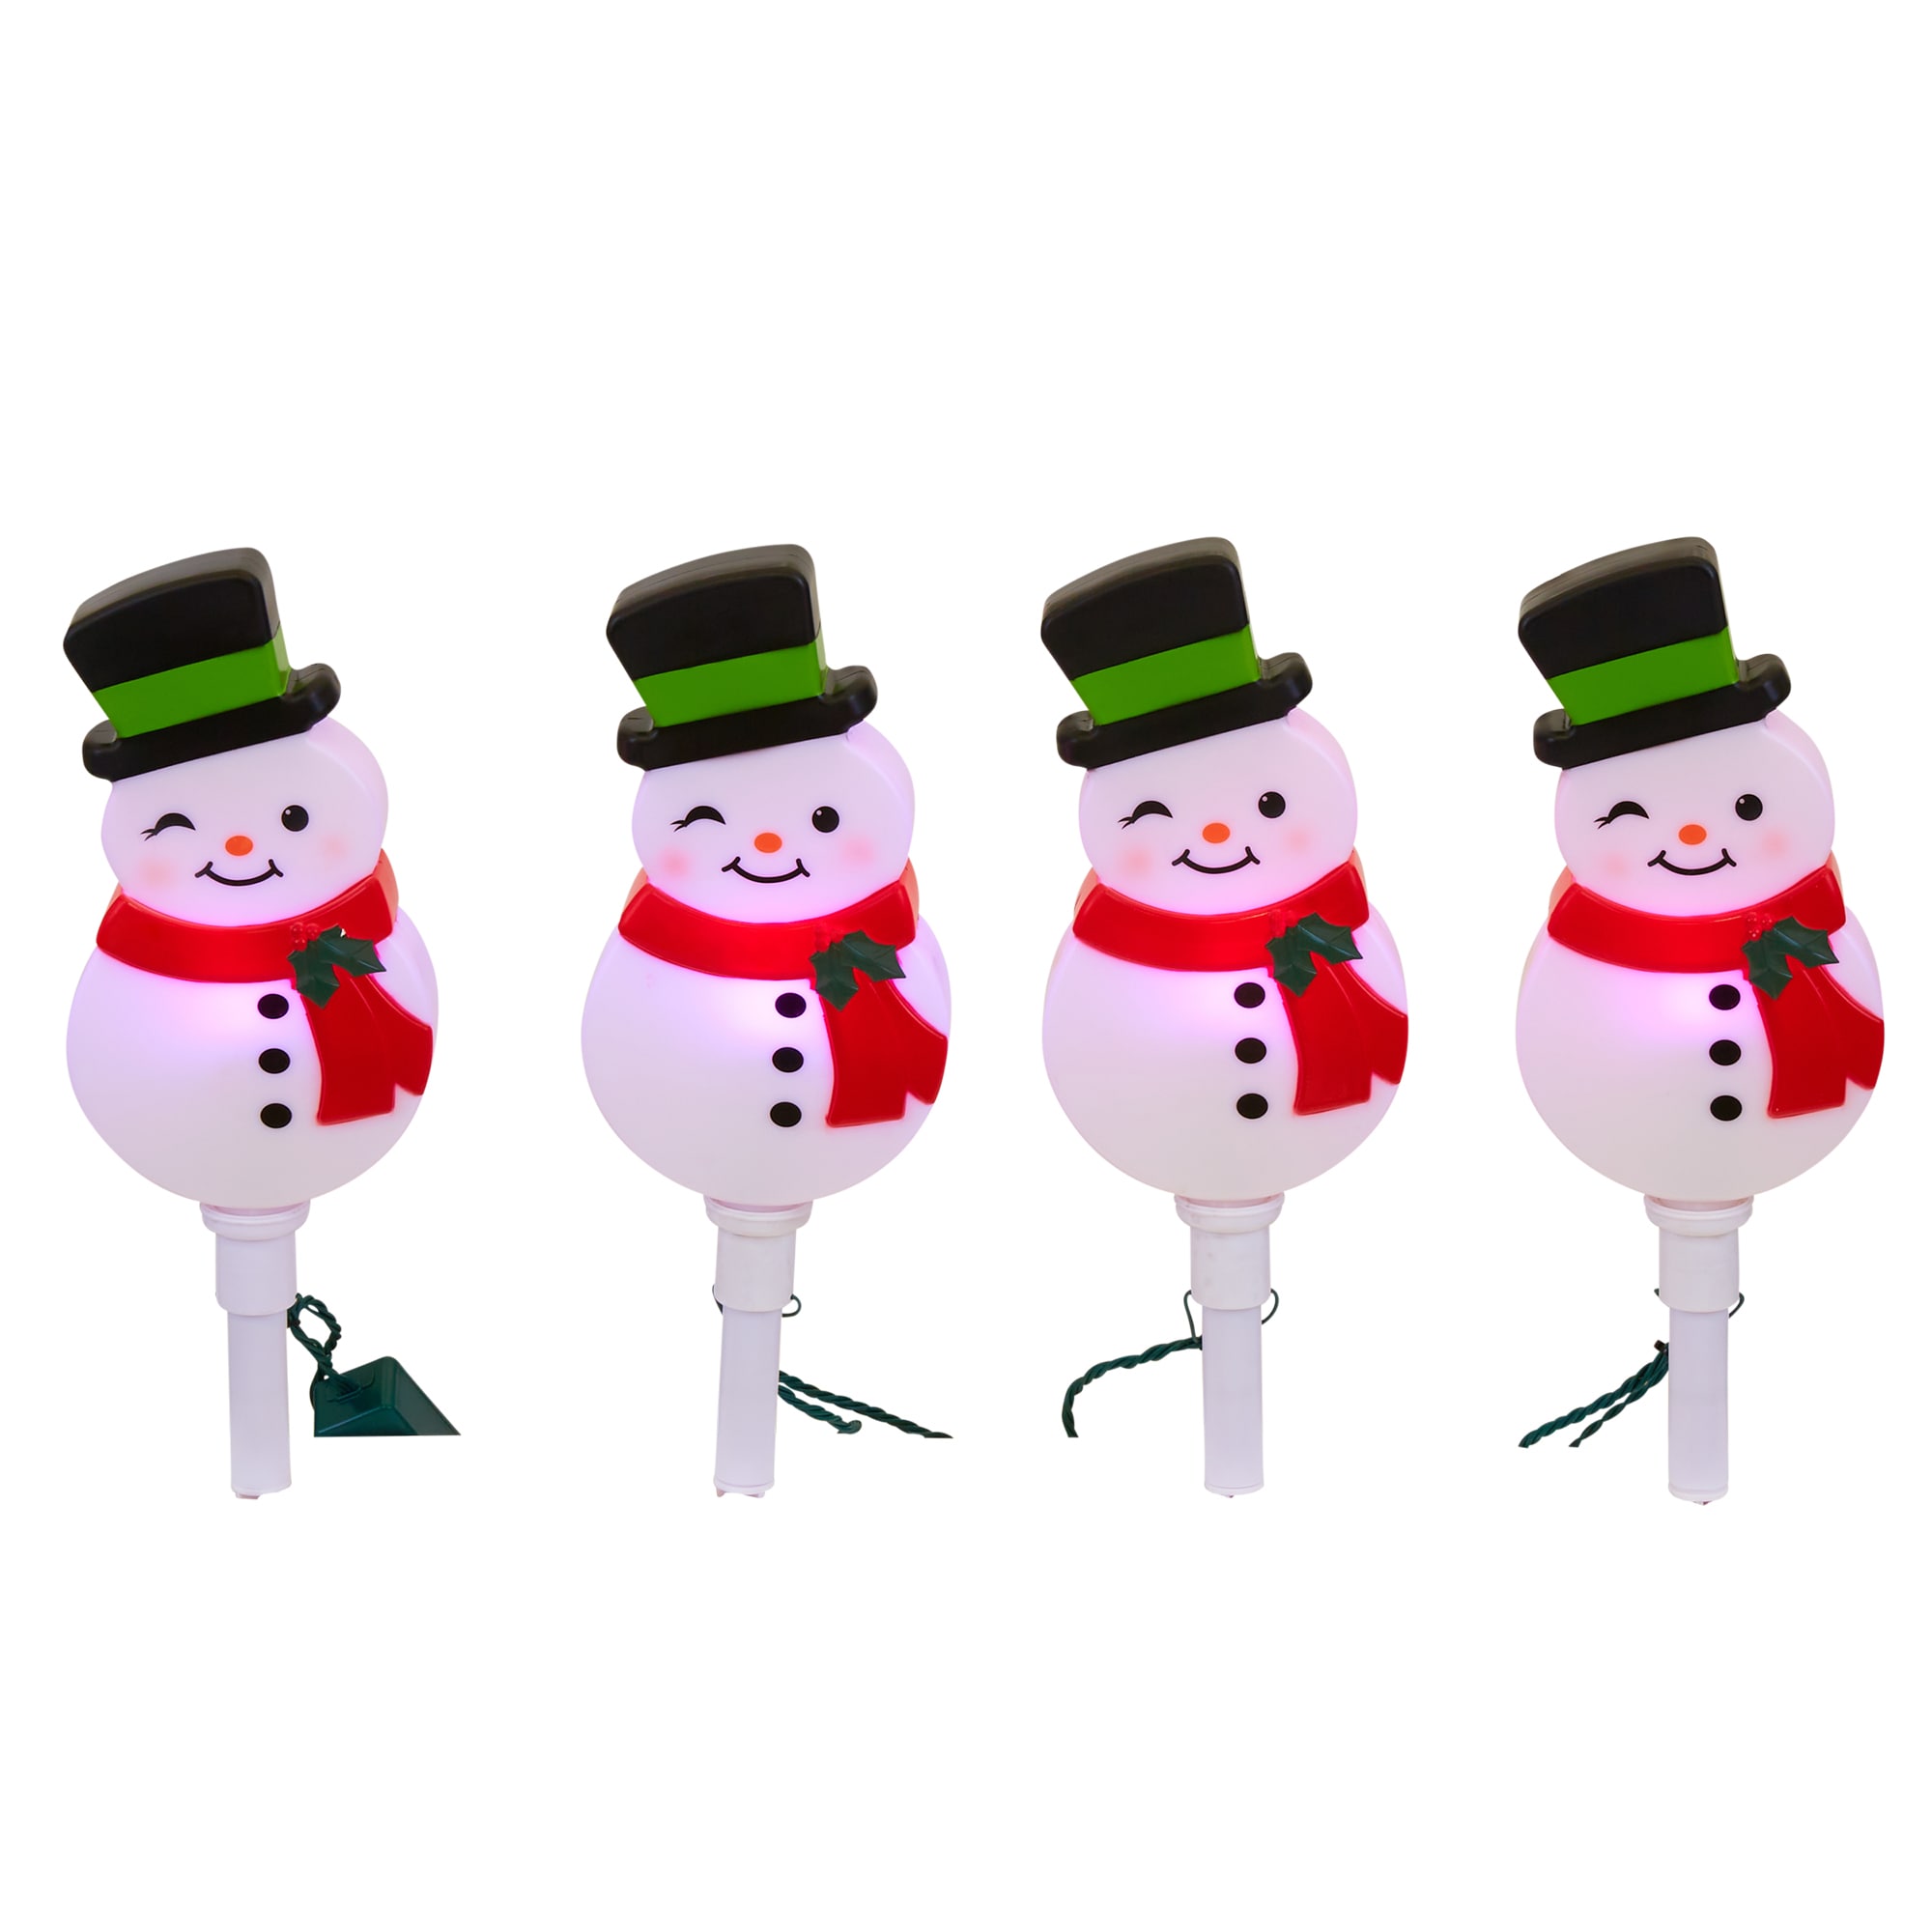 Dancing Snowman Christmas Gift Decoration Lots 4 Solar Powered Motion Toy 